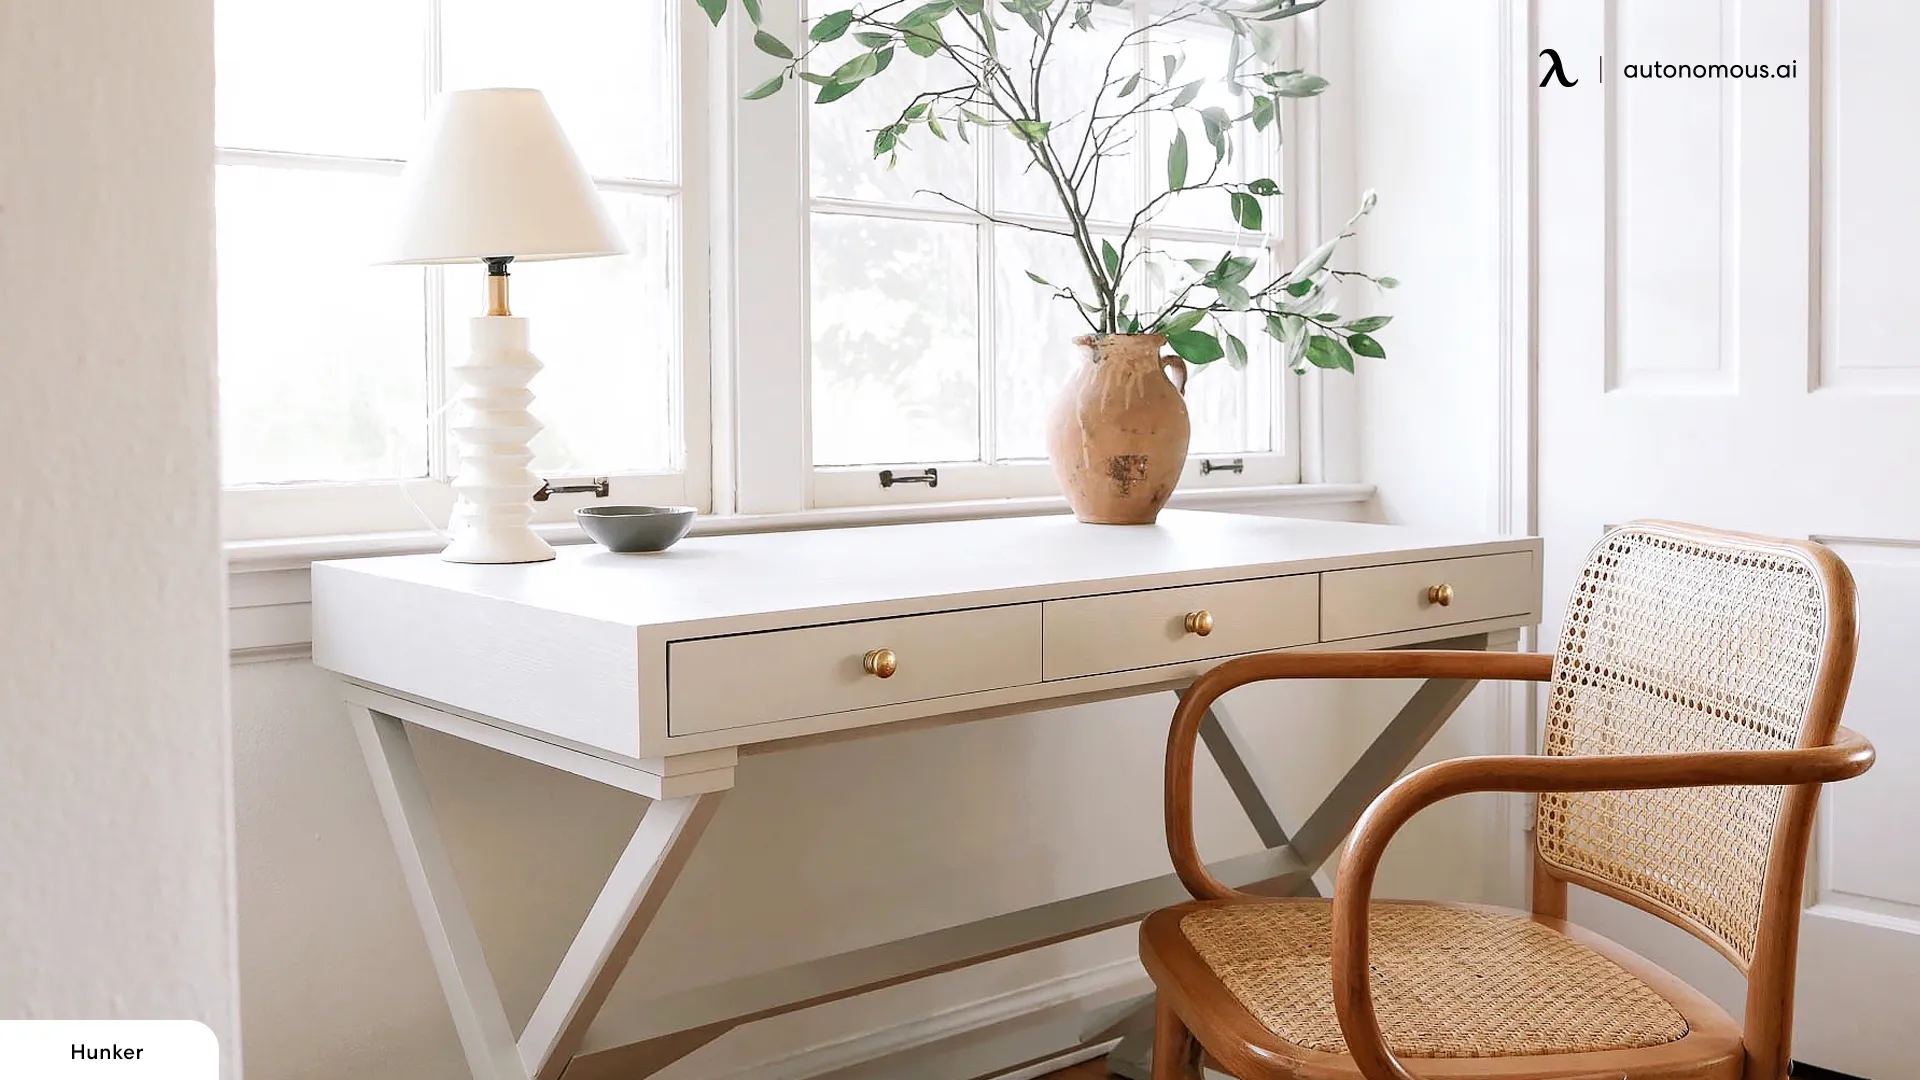 Adding plants to your home office is a simple yet effective way to embrace the organic modern style